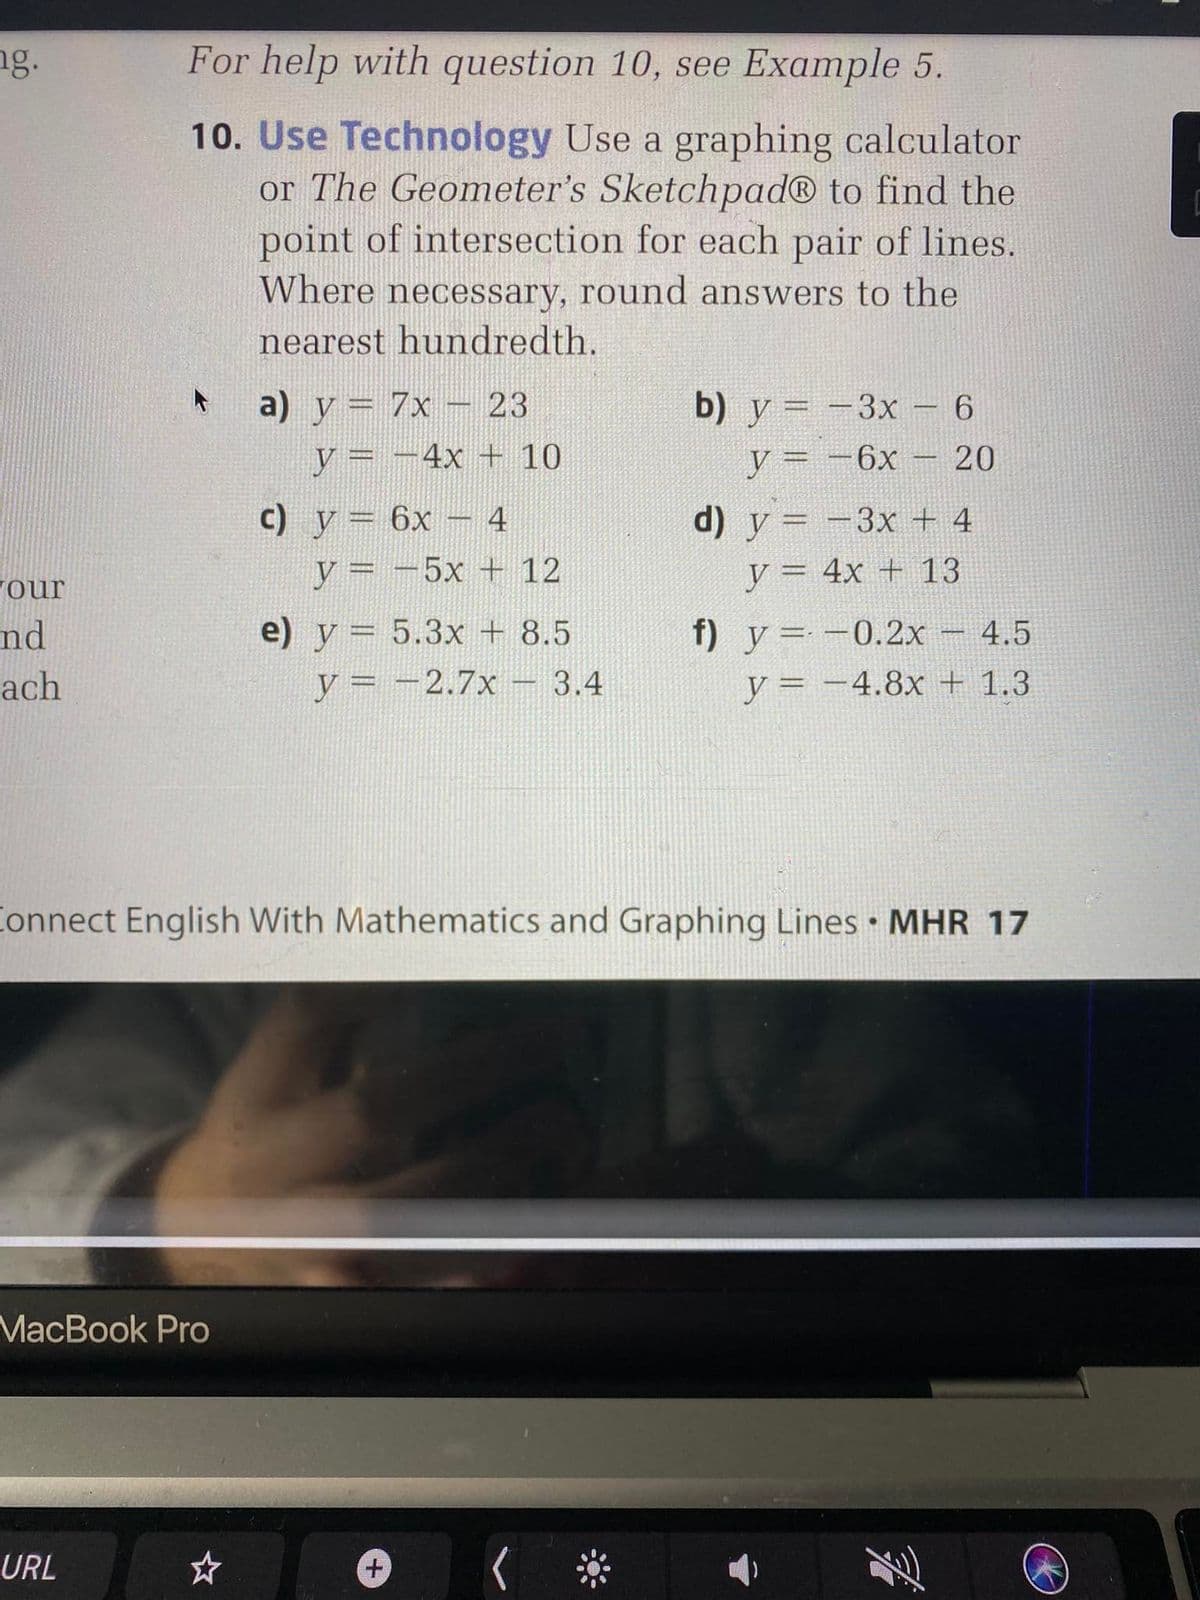 ng.
For help with question 10, see Example 5.
10. Use Technology Use a graphing calculator
or The Geometer's Sketchpad® to find the
point of intersection for each pair of lines.
Where necessary, round answers to the
nearest hundredth.
a) y = 7x – 23
b) y = -3x - 6
y= -4x + 10
y = -6x
%3D
c) y= 6x – 4
d) y = -3x + 4
%3D
our
y = -5x + 12
y = 4x + 13
nd
e) y = 5.3x + 8.5
f) y=-0.2x- 4.5
ach
y = -2.7x - 3.4
y = -4.8x + 1.3
|
Connect English With Mathematics and Graphing Lines • MHR 17
MacBook Pro
URL
